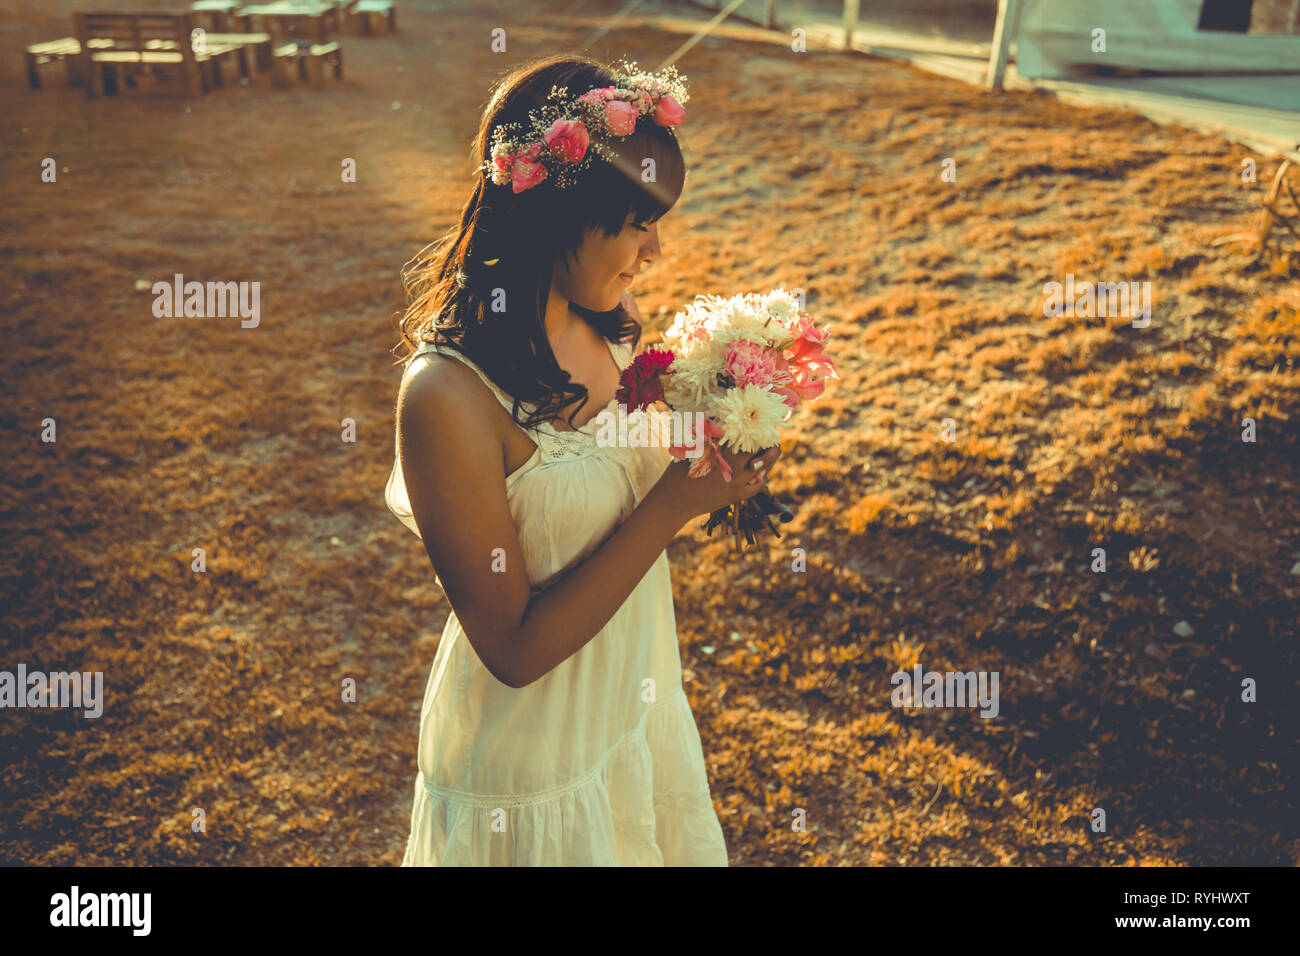 Girl modeling with flowers bouquet Stock Photo